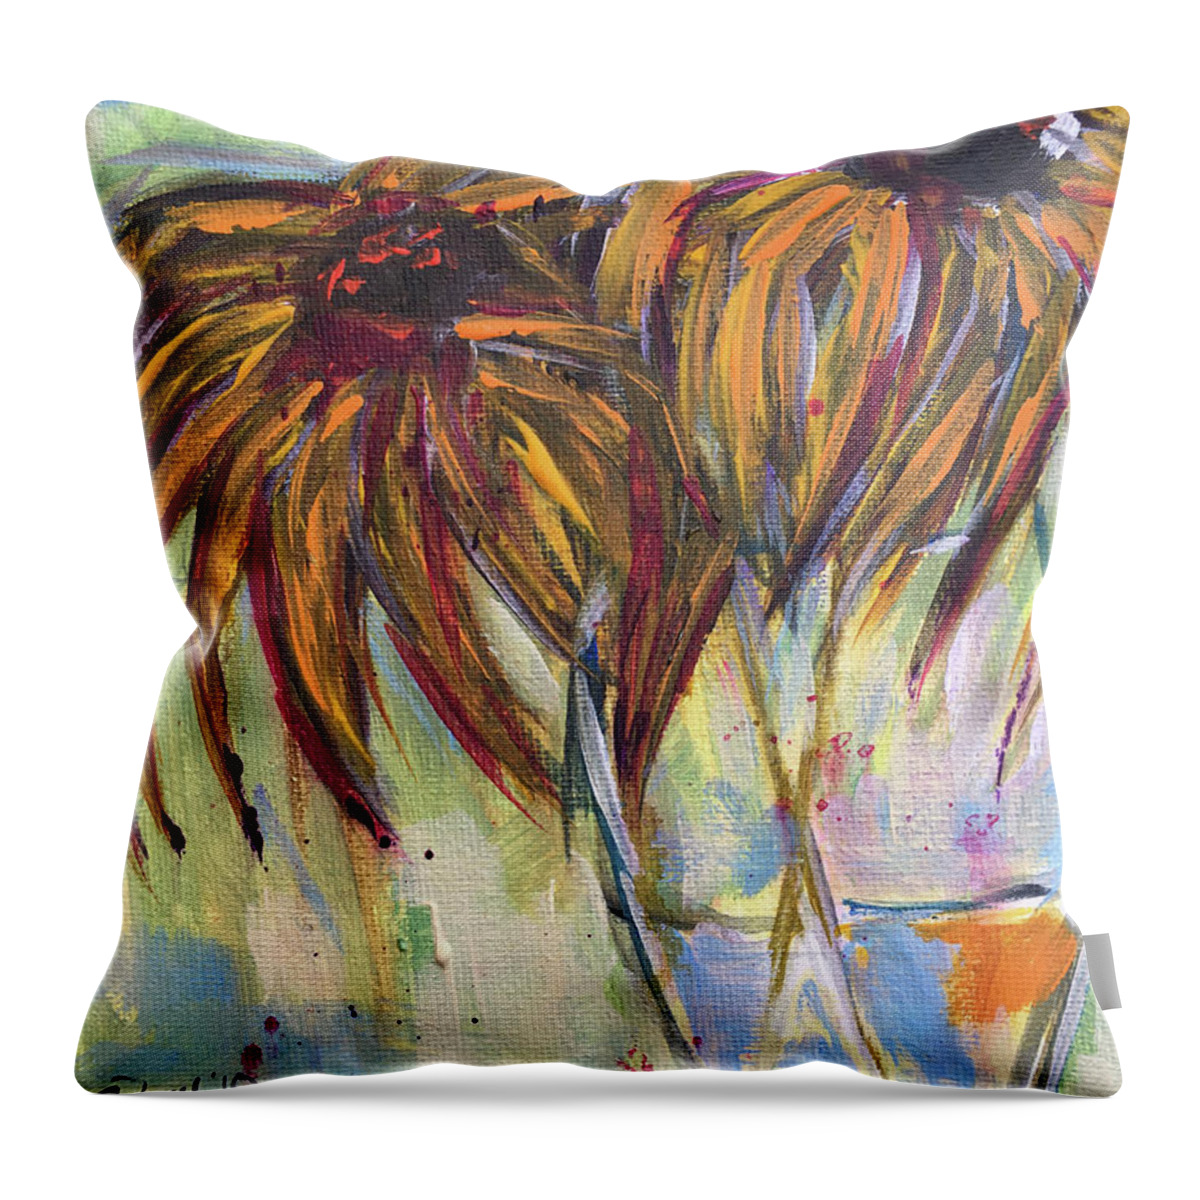 Flowers Throw Pillow featuring the painting Wild Flowers by Roxy Rich